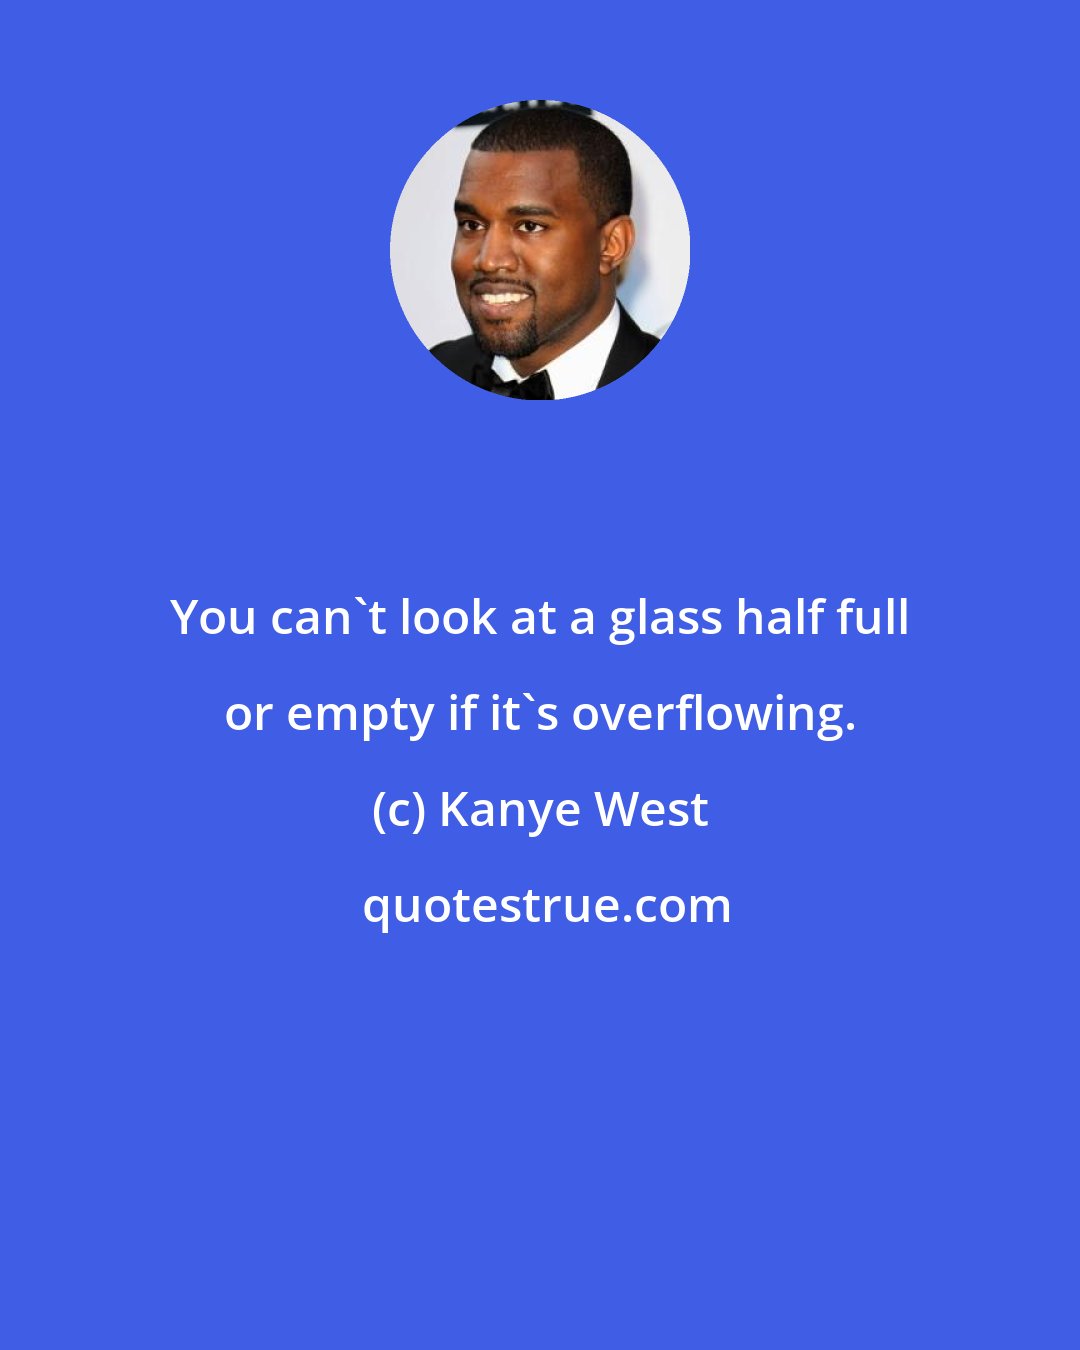 Kanye West: You can't look at a glass half full or empty if it's overflowing.